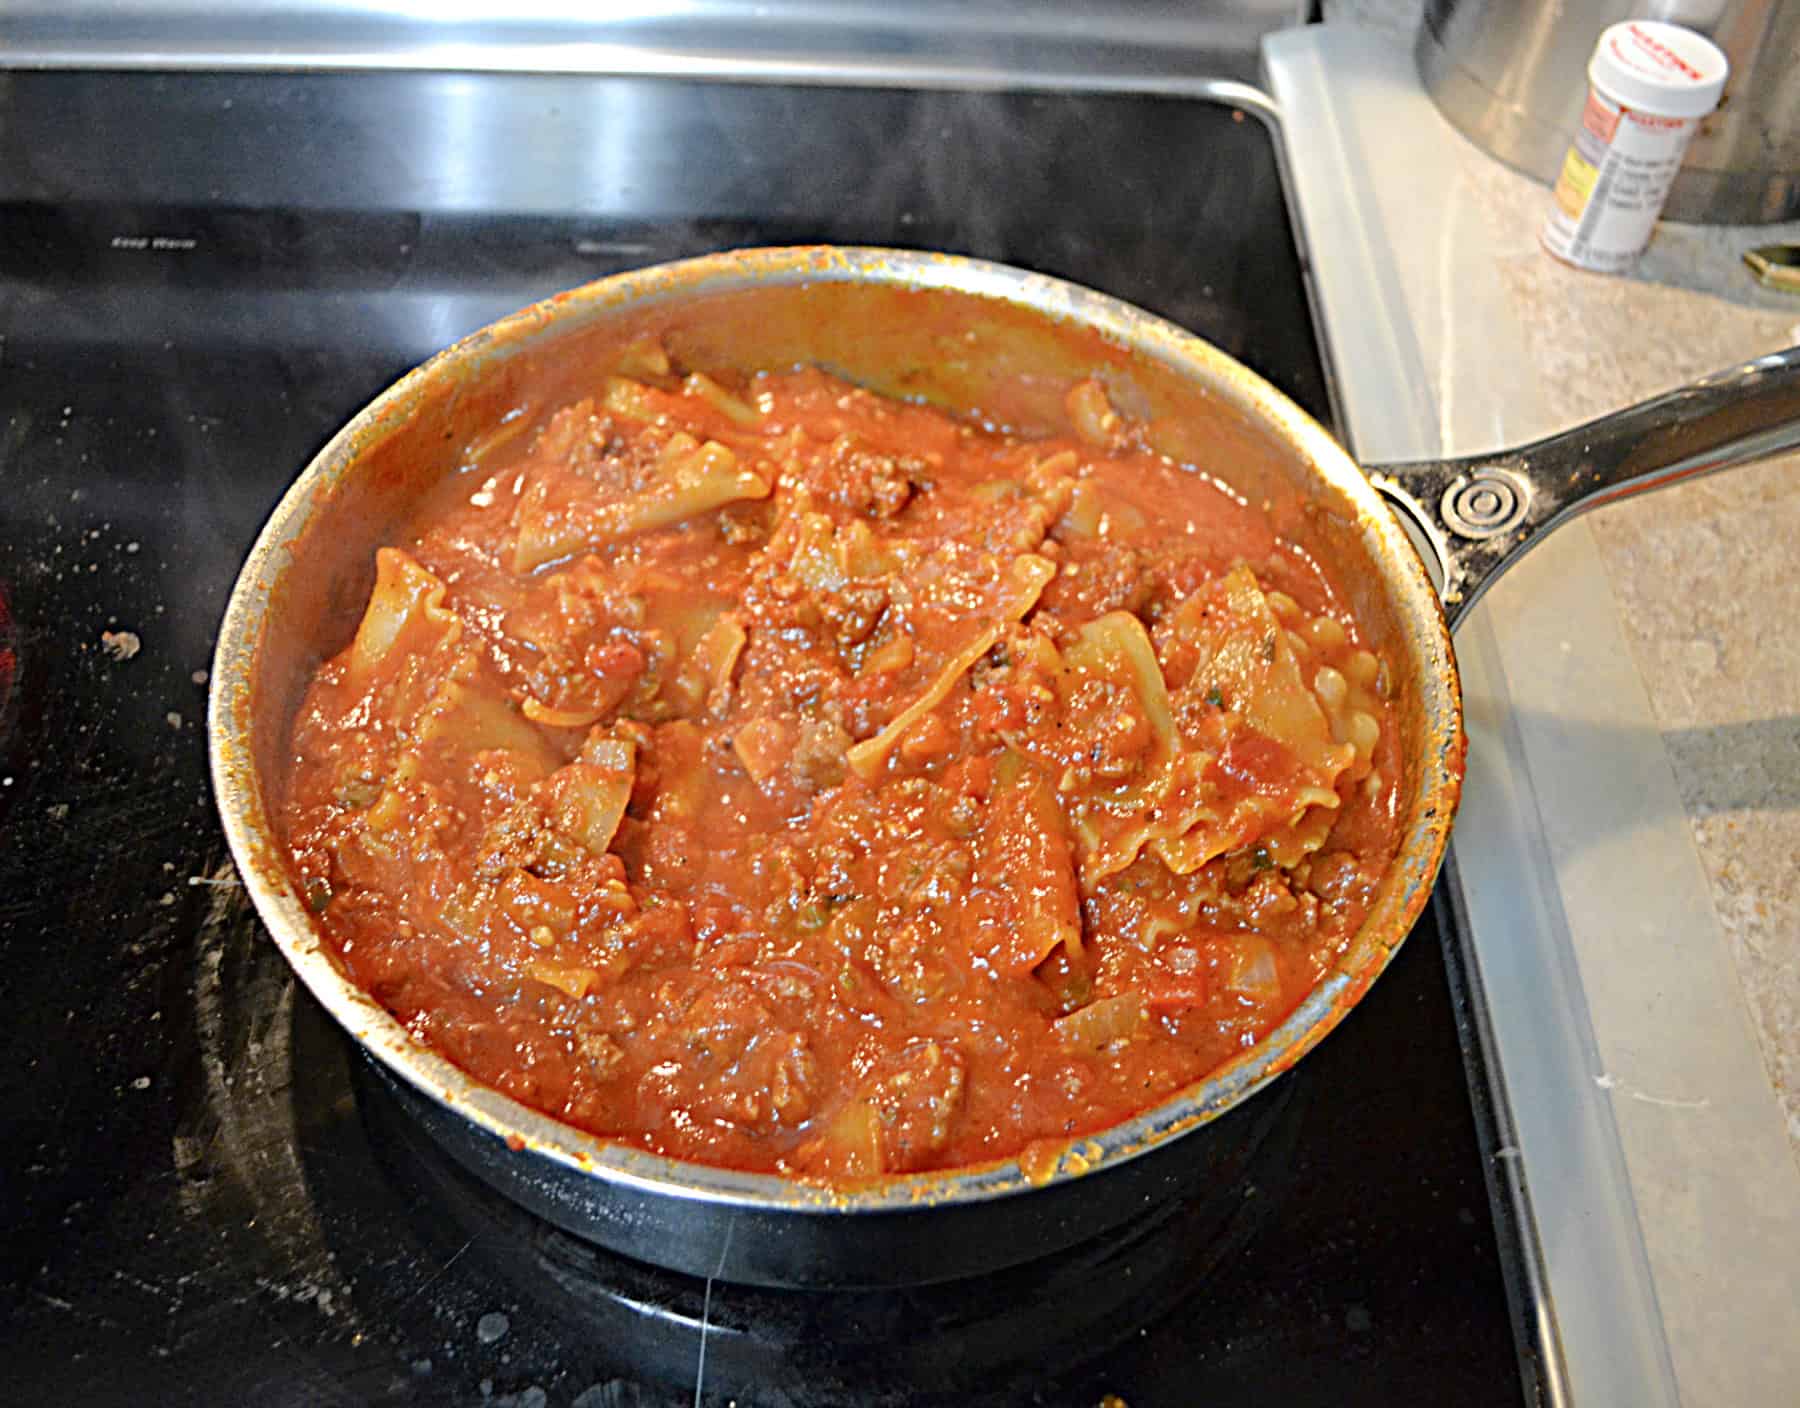 A skillet filled with tomato sauce, beef, and noodles.